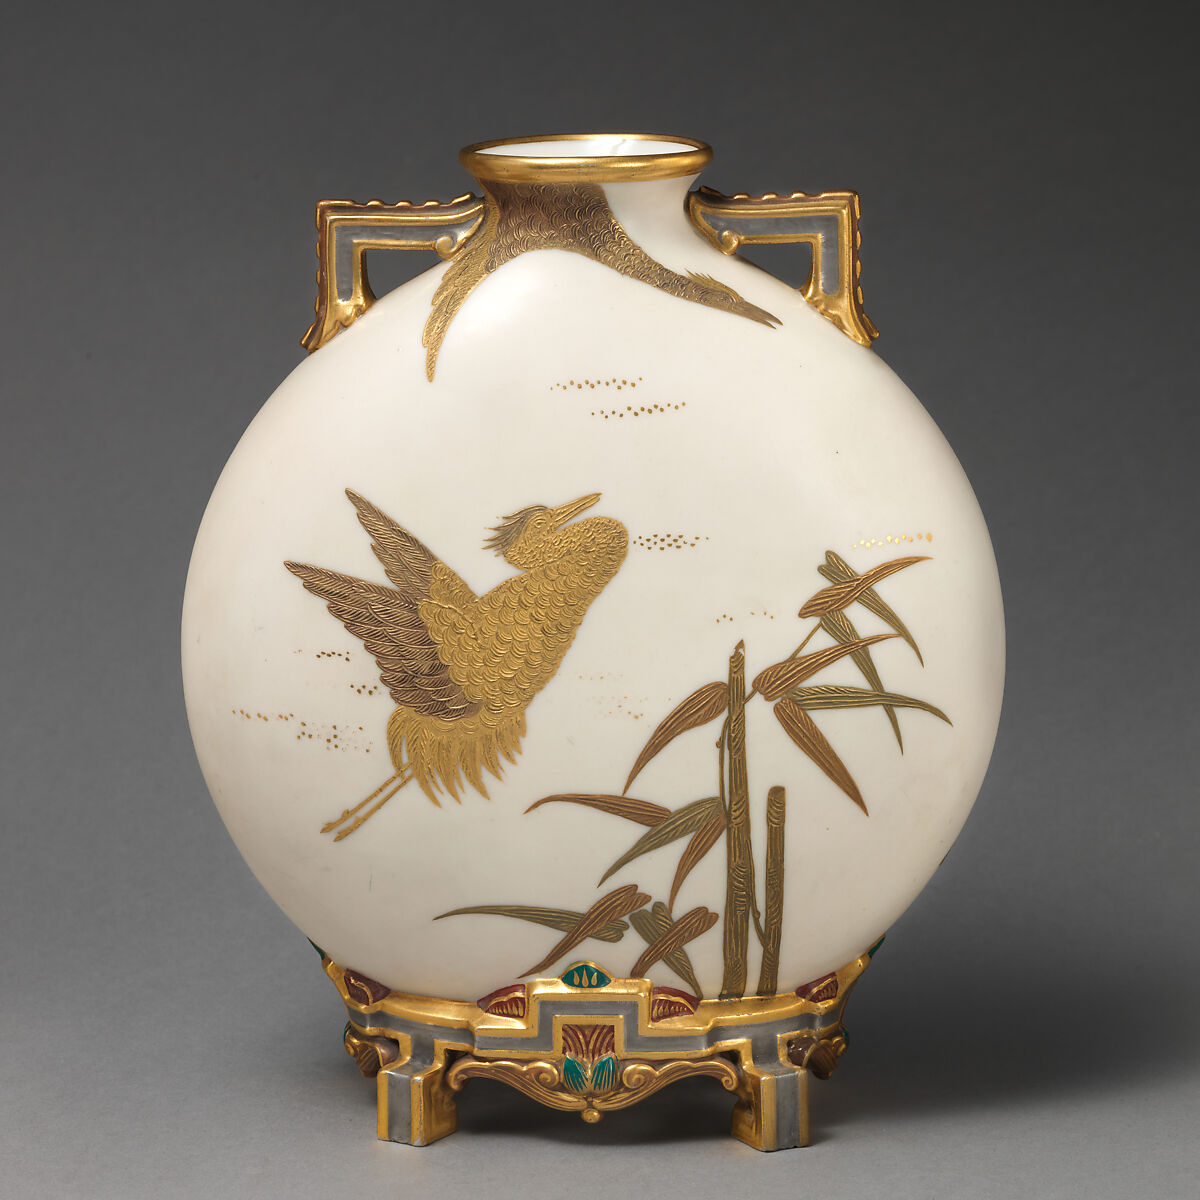 Moon flask with white and gold crane, Worcester factory (British, 1751–2008), Bone china "ivory porcelain" with gilding, British, Worcester 